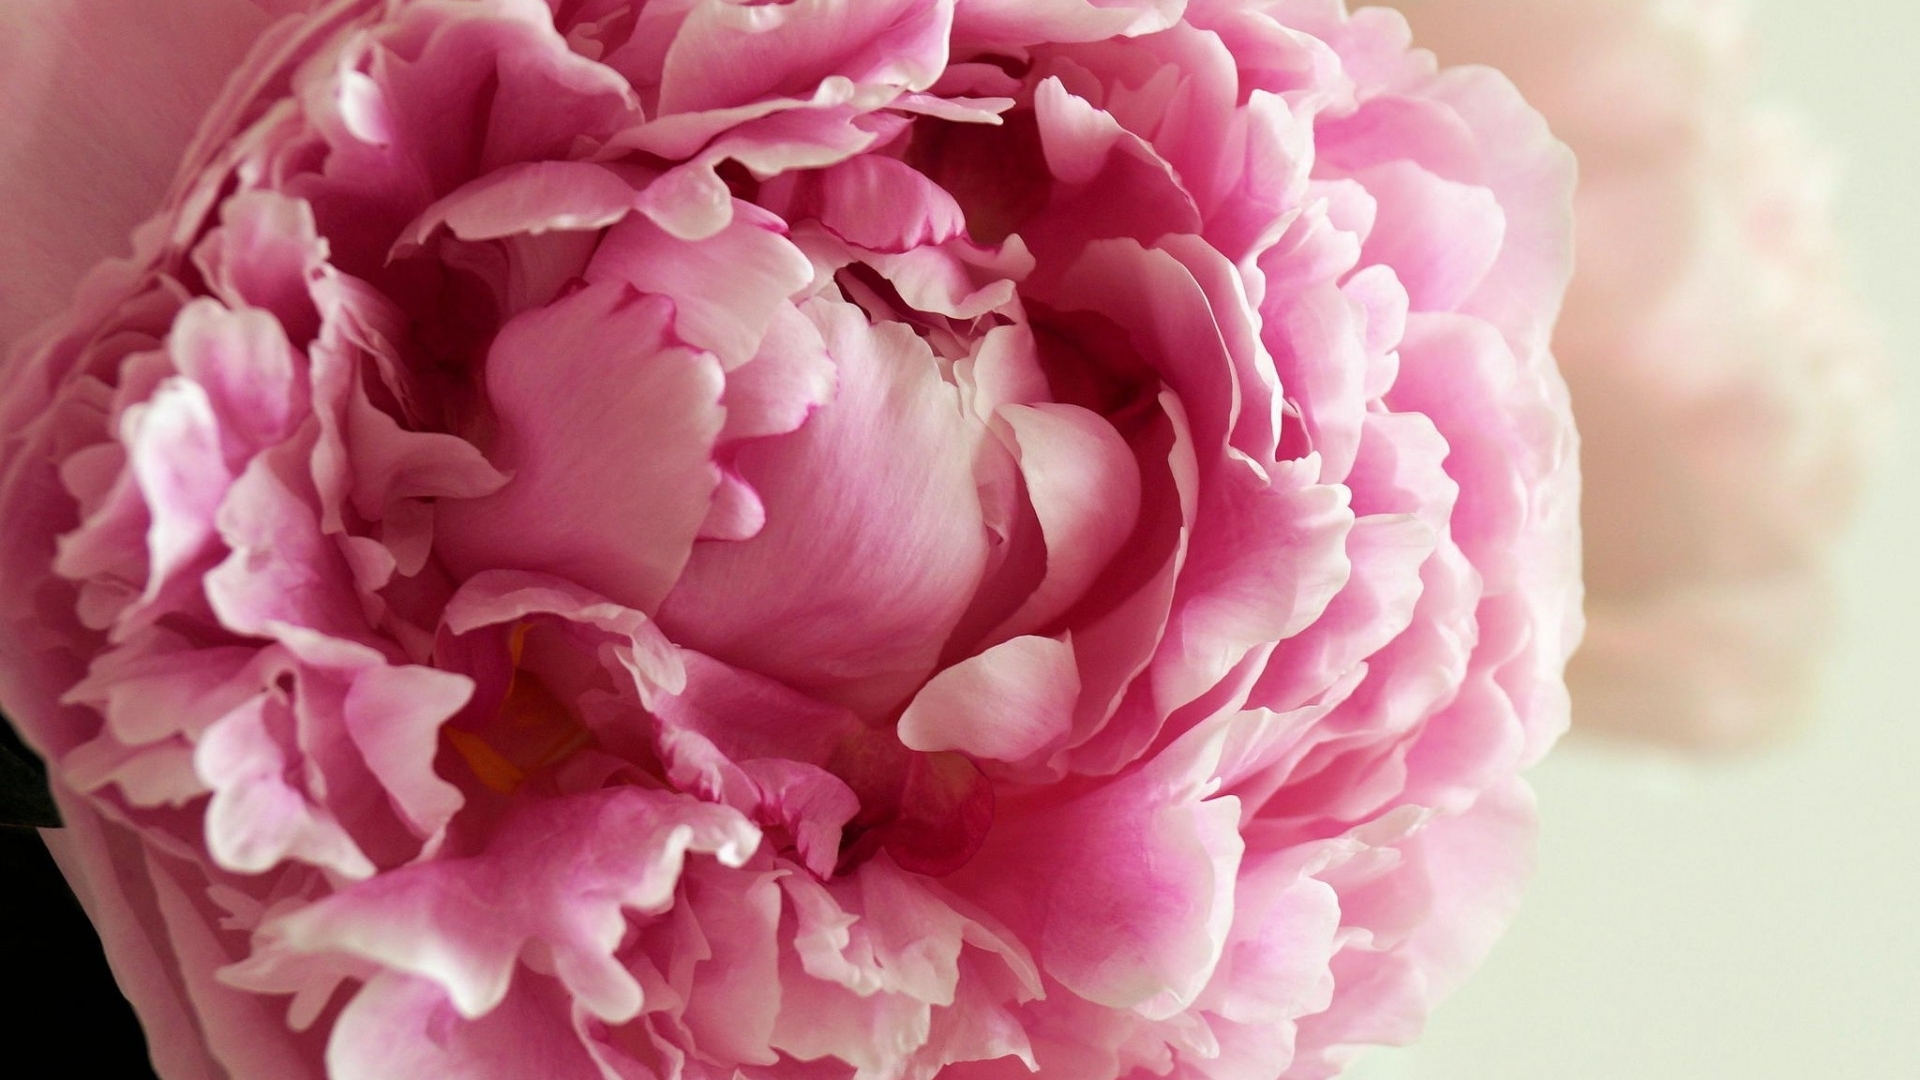 Floral carpet or Wallpaper Background of pink and white peonies Morning  light in the room Beautiful peony flower for catalog or online store  Floral shop and delivery concept  Stock Photo 